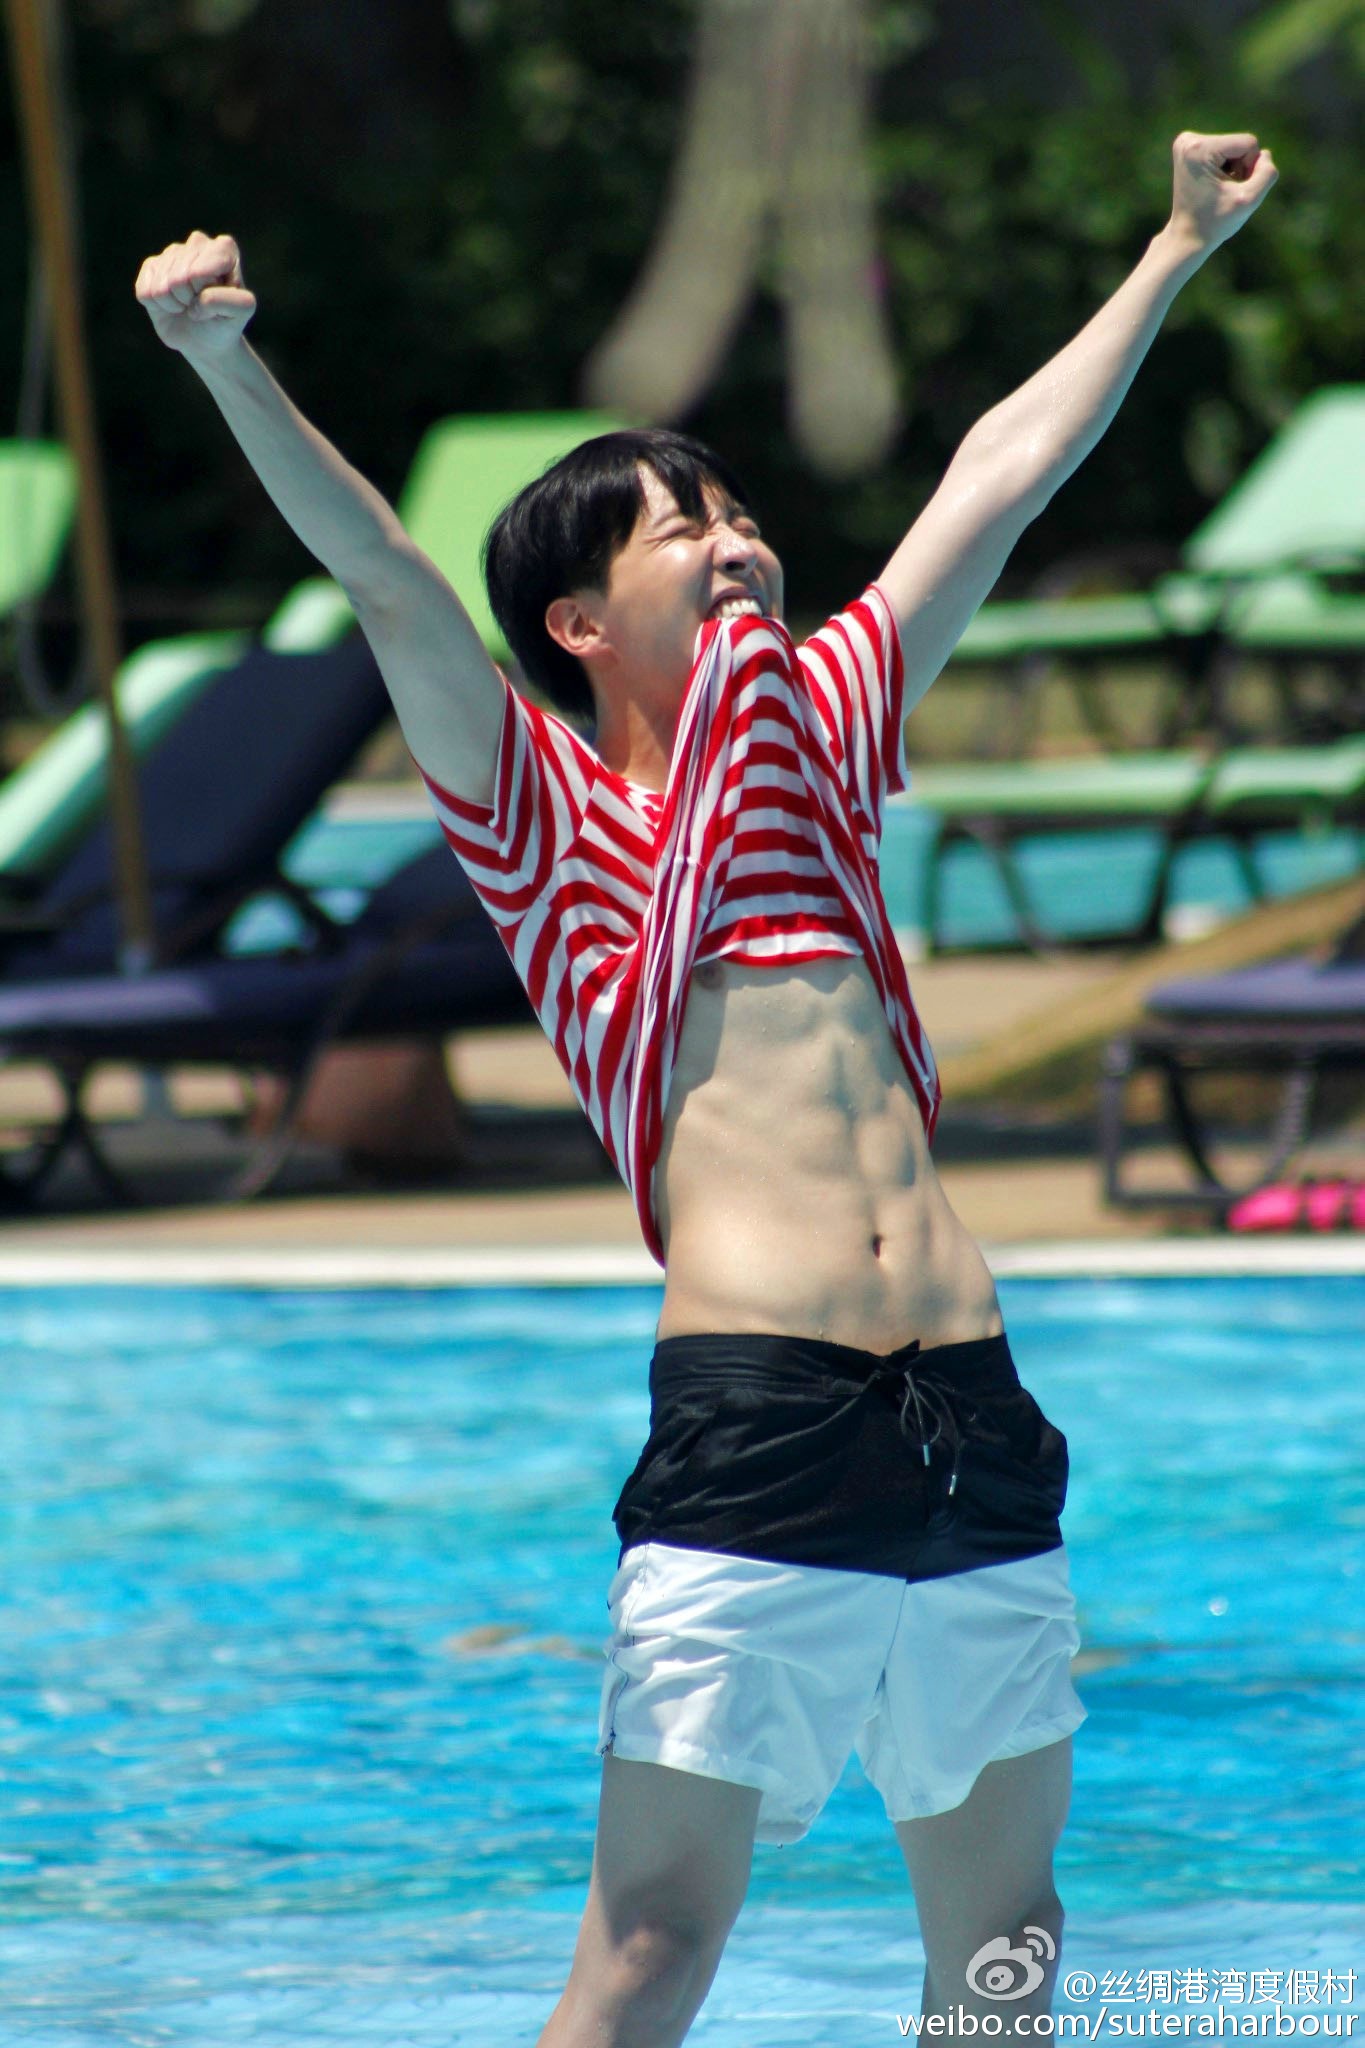 15+ BTS Shirtless Edits That Will Make You Crank The AC – K-Luv